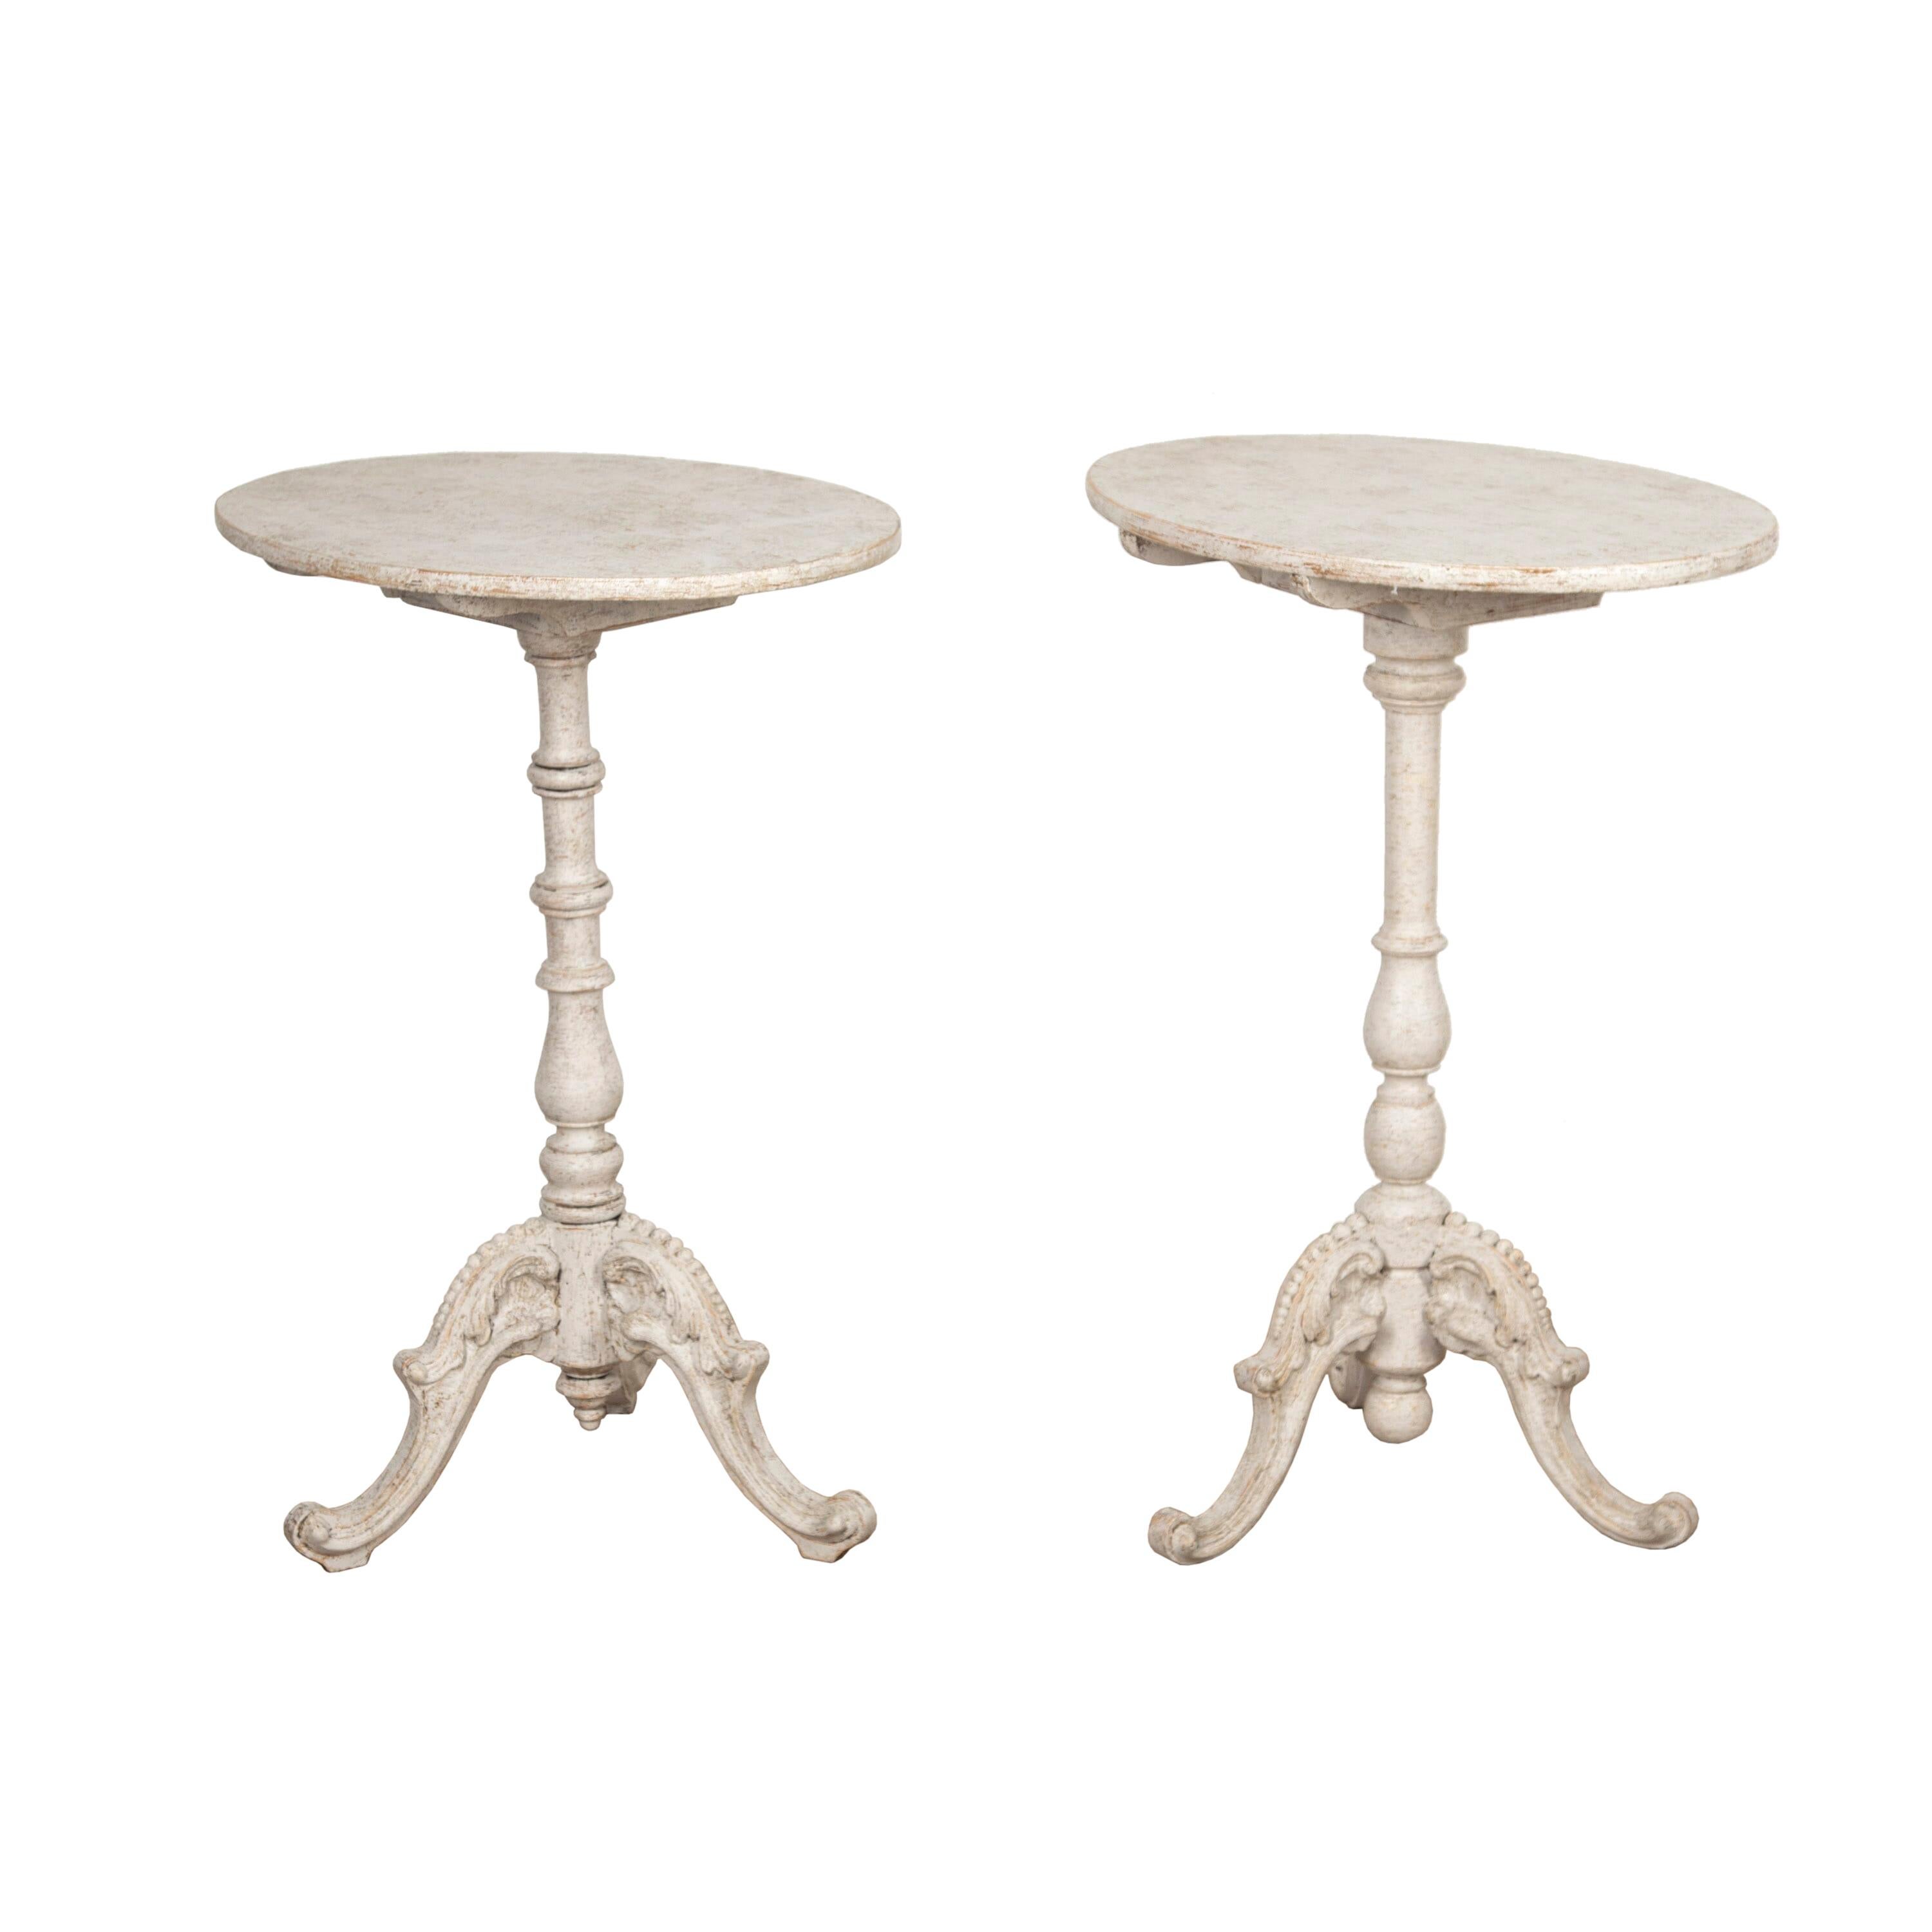 Lovely matched pair of Swedish side tables. 
These wonderful tables have decorative tripod bases and stems which have been wonderfully turned to represent columns. Both have circular tops which are slightly different in size. 
They have been